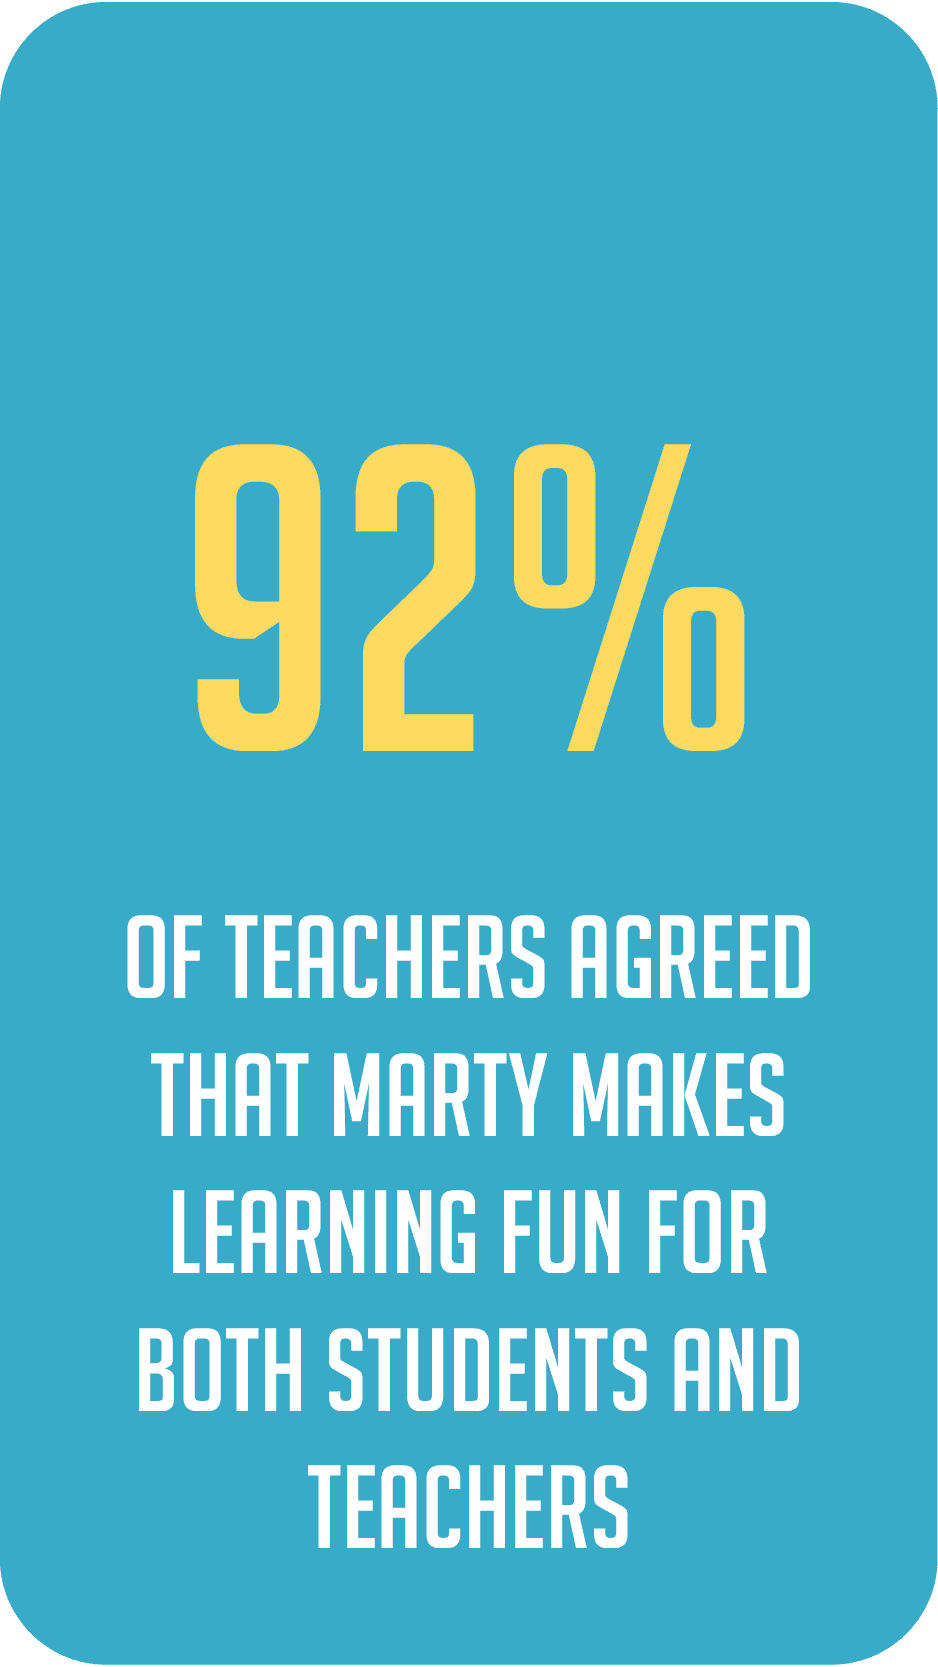 92% of teachers agreed that Marty makes learning fun for both students and teachers.